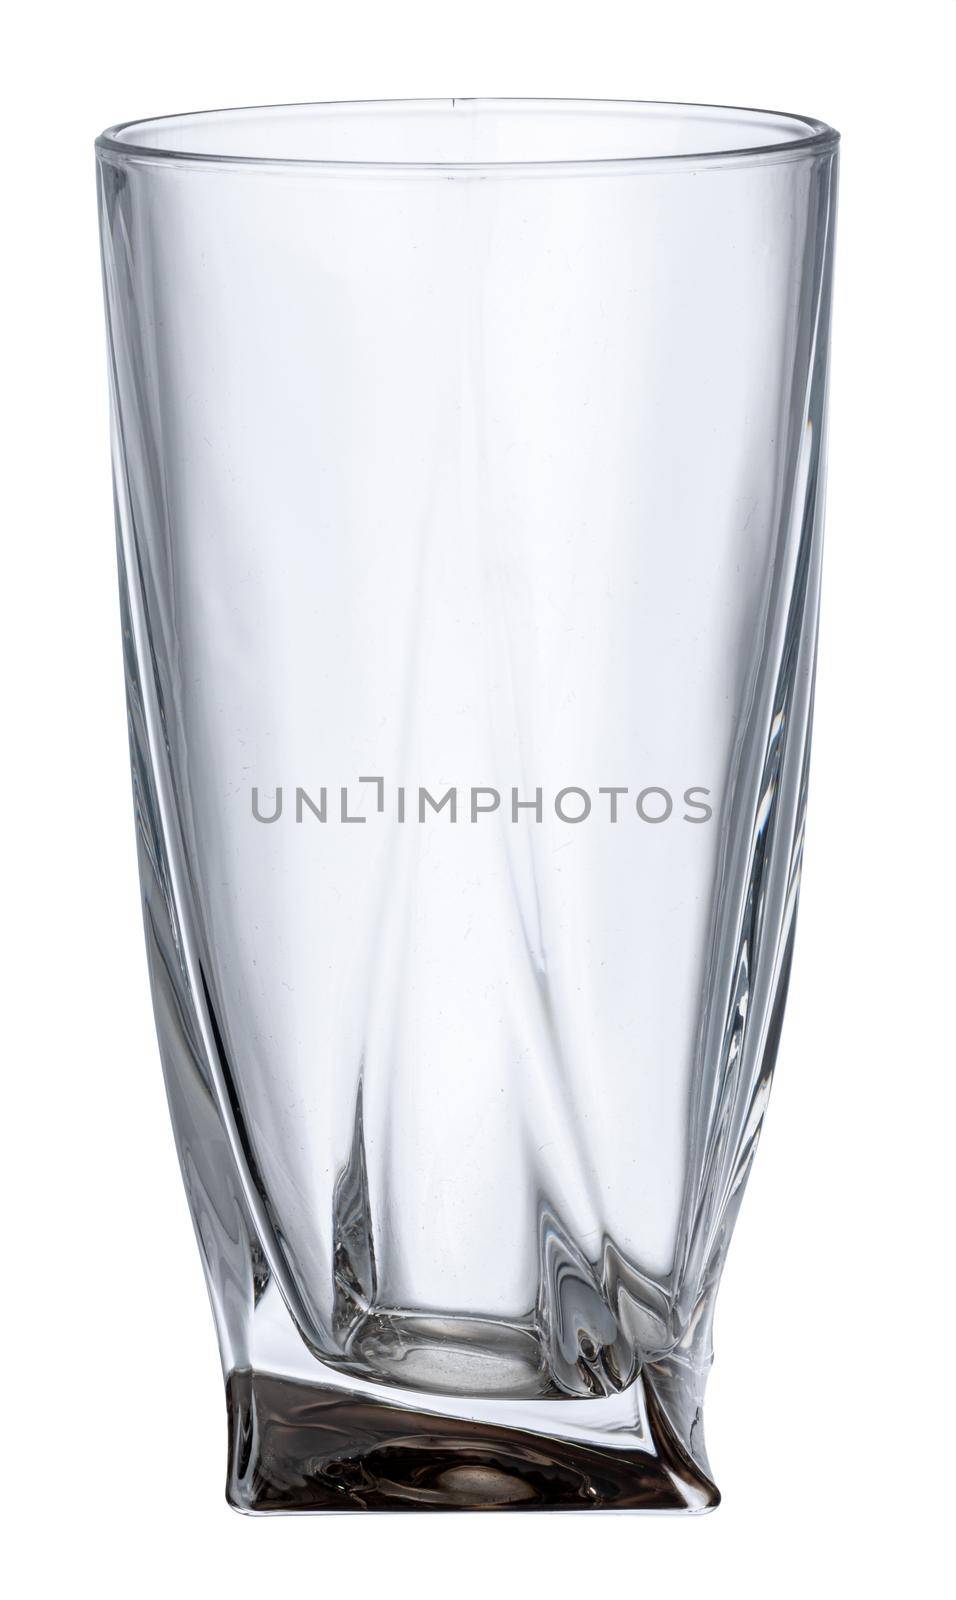 New empty glass isolated on white background close up